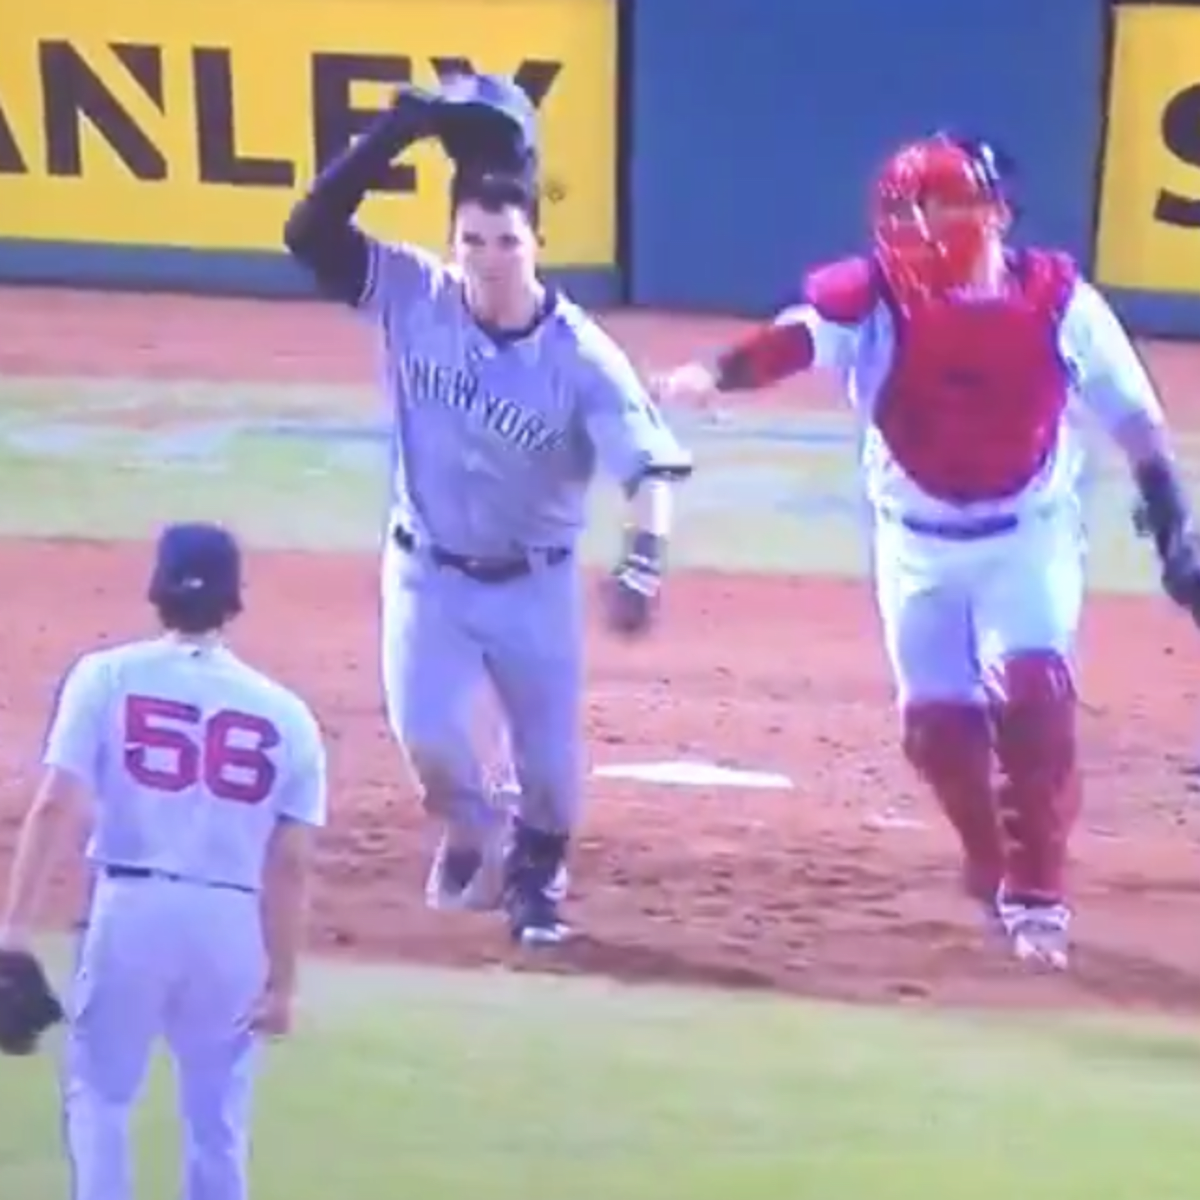 VIDEO: Yankees And Red Sox Brawl